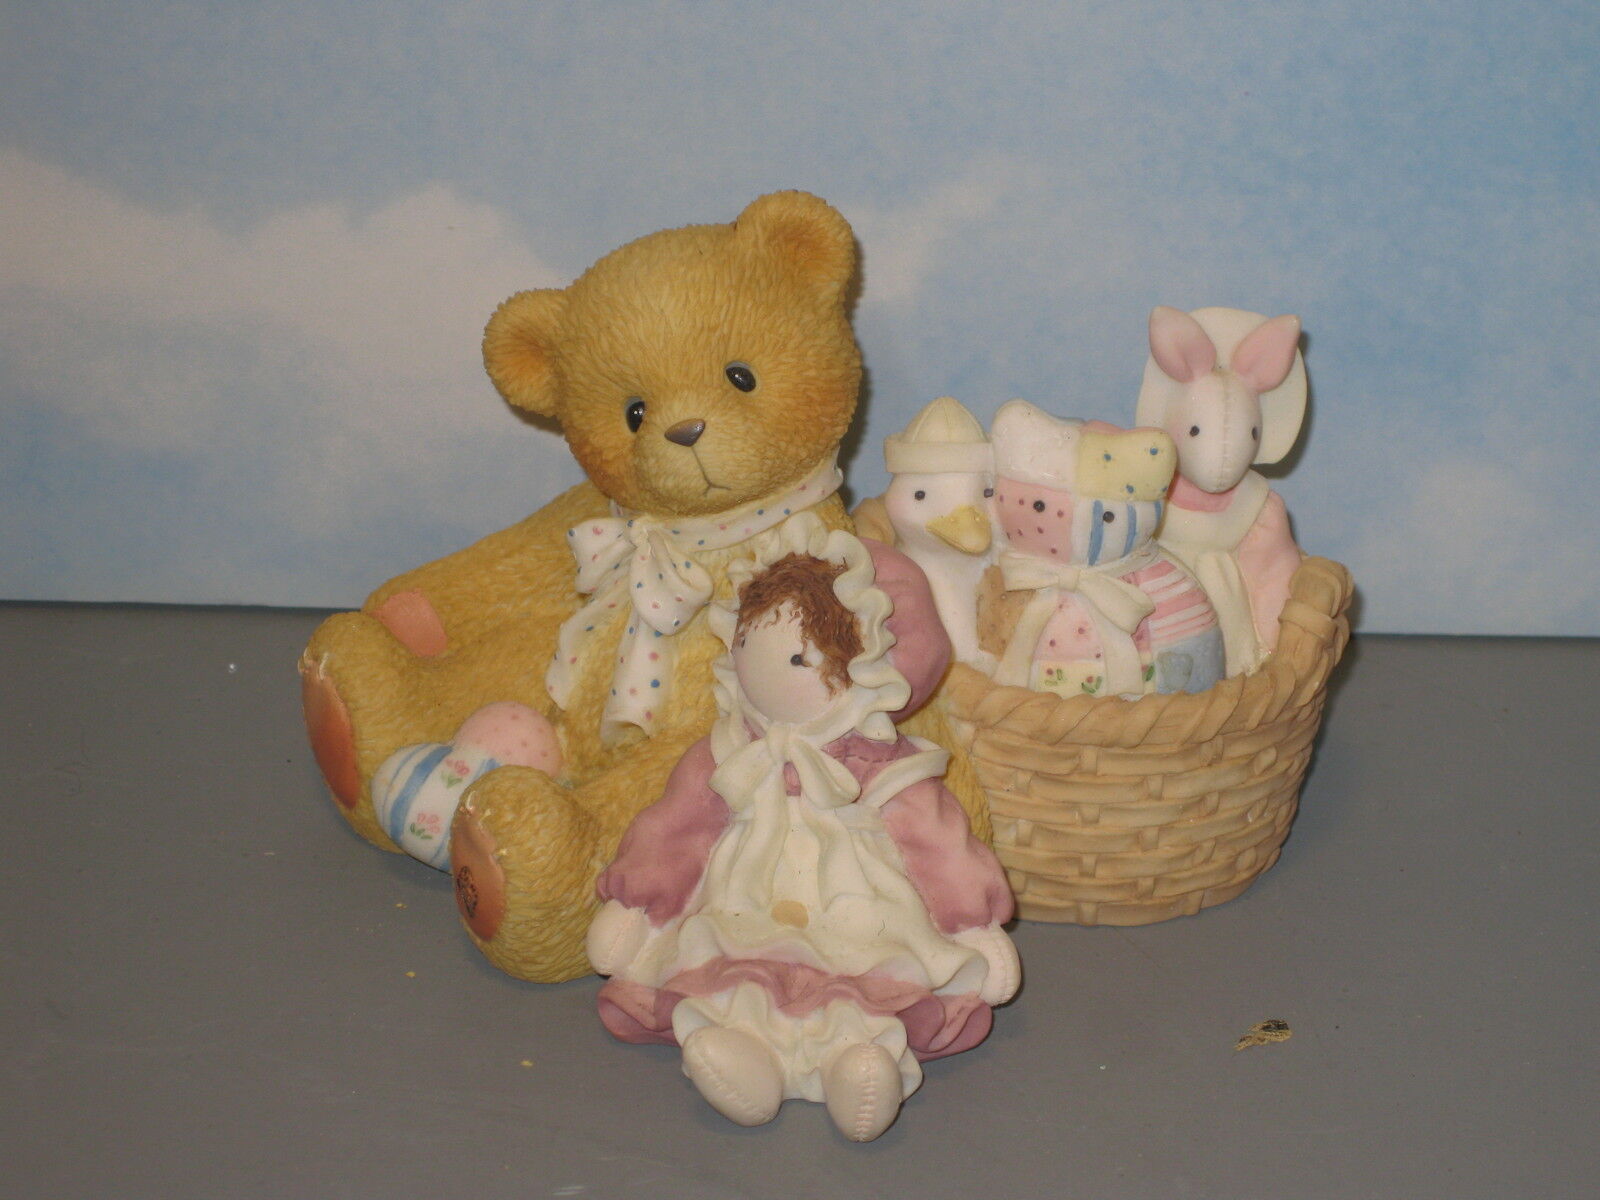 Cherished Teddies Randy Your\'re Never Alone with Good Friends Around No Box 